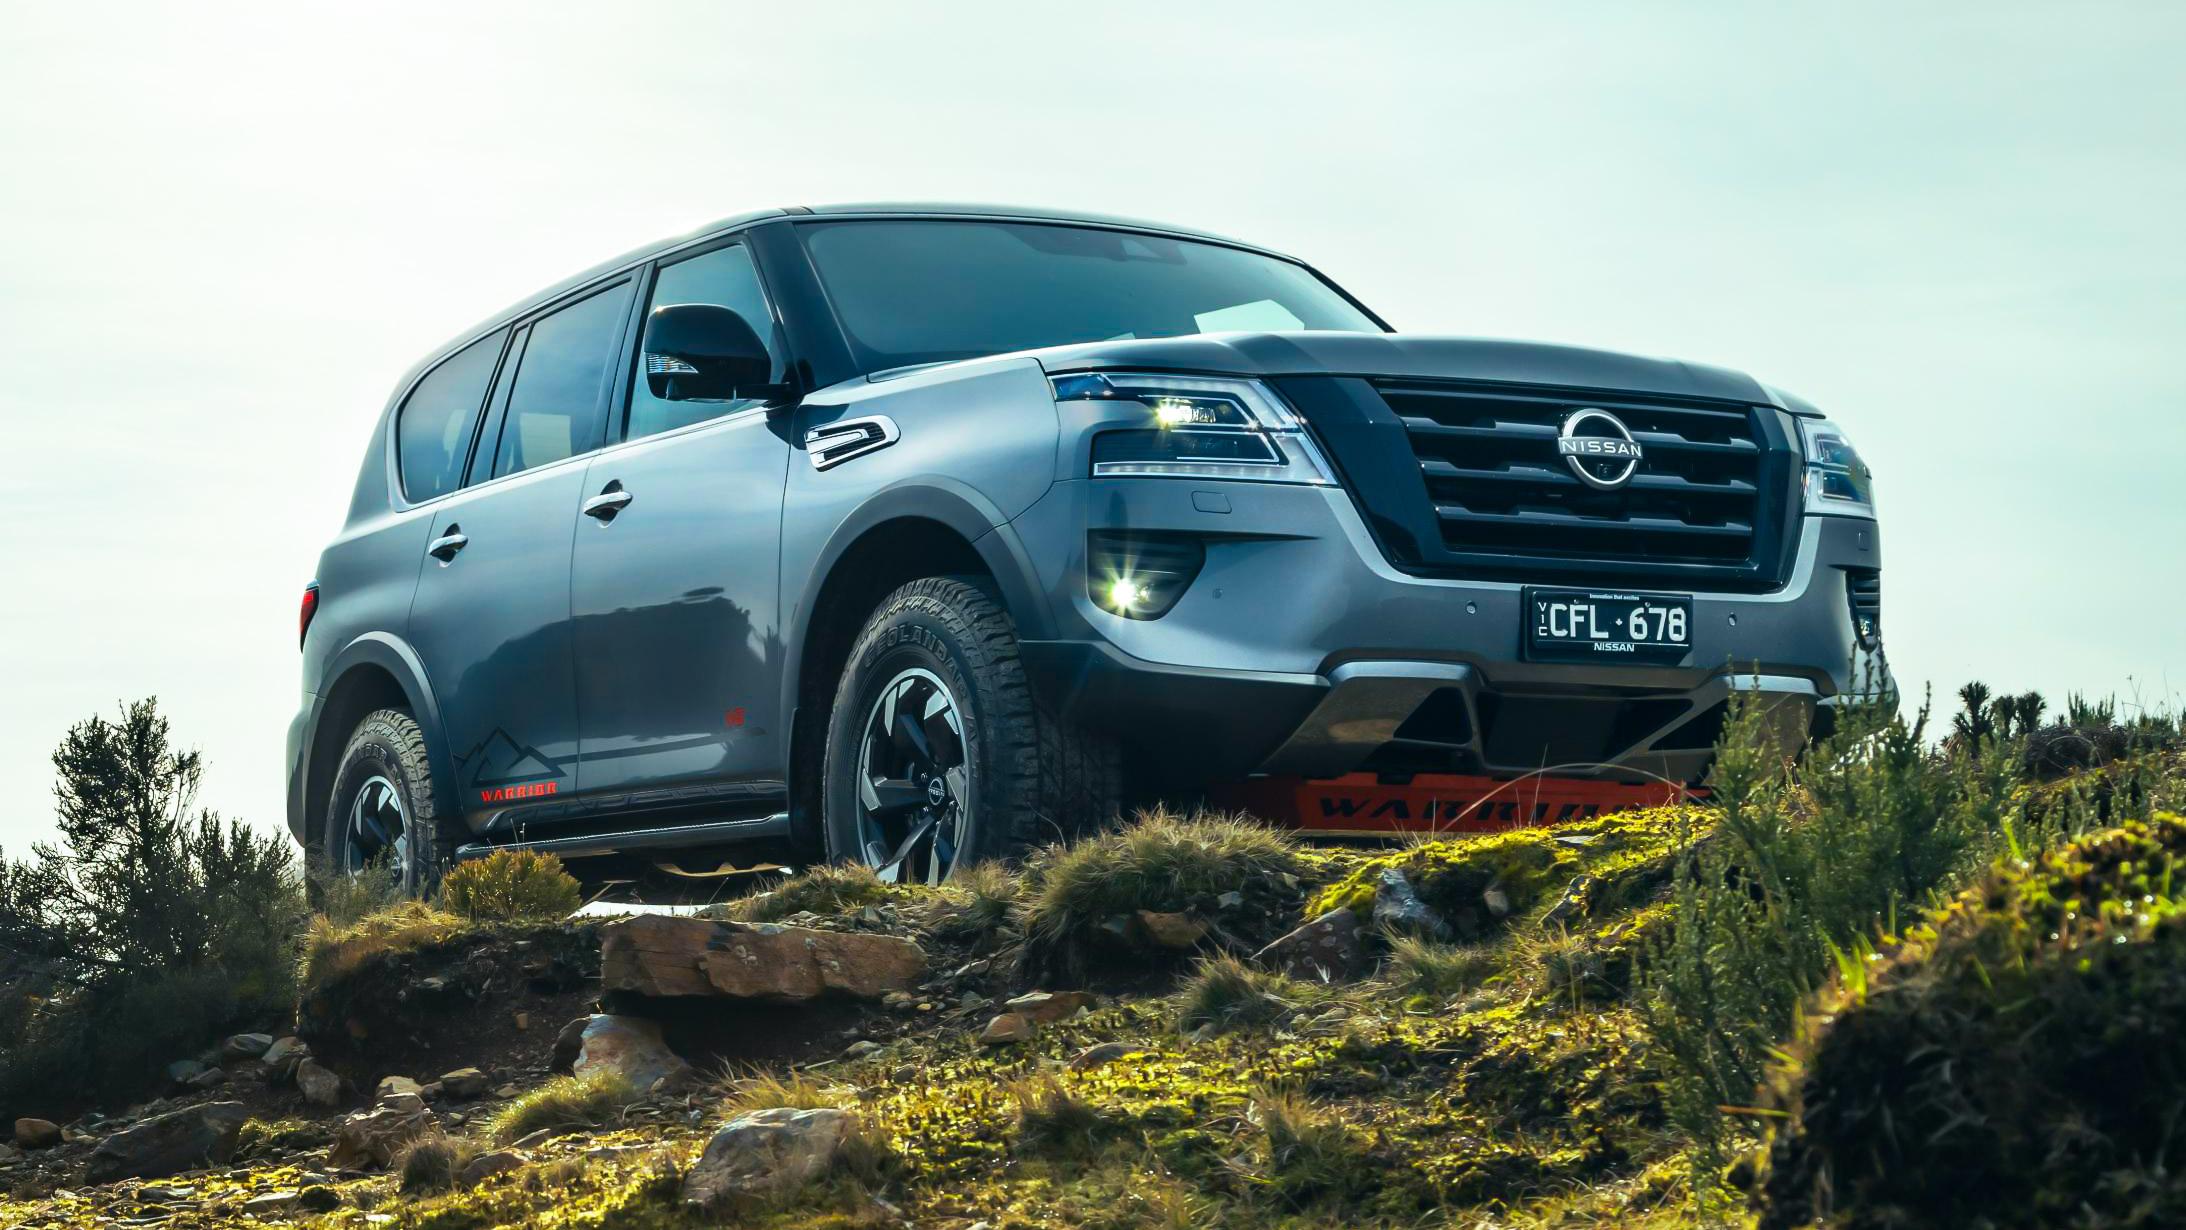 Nissan Patrol Review: An Ideal Go-Anywhere Family SUV